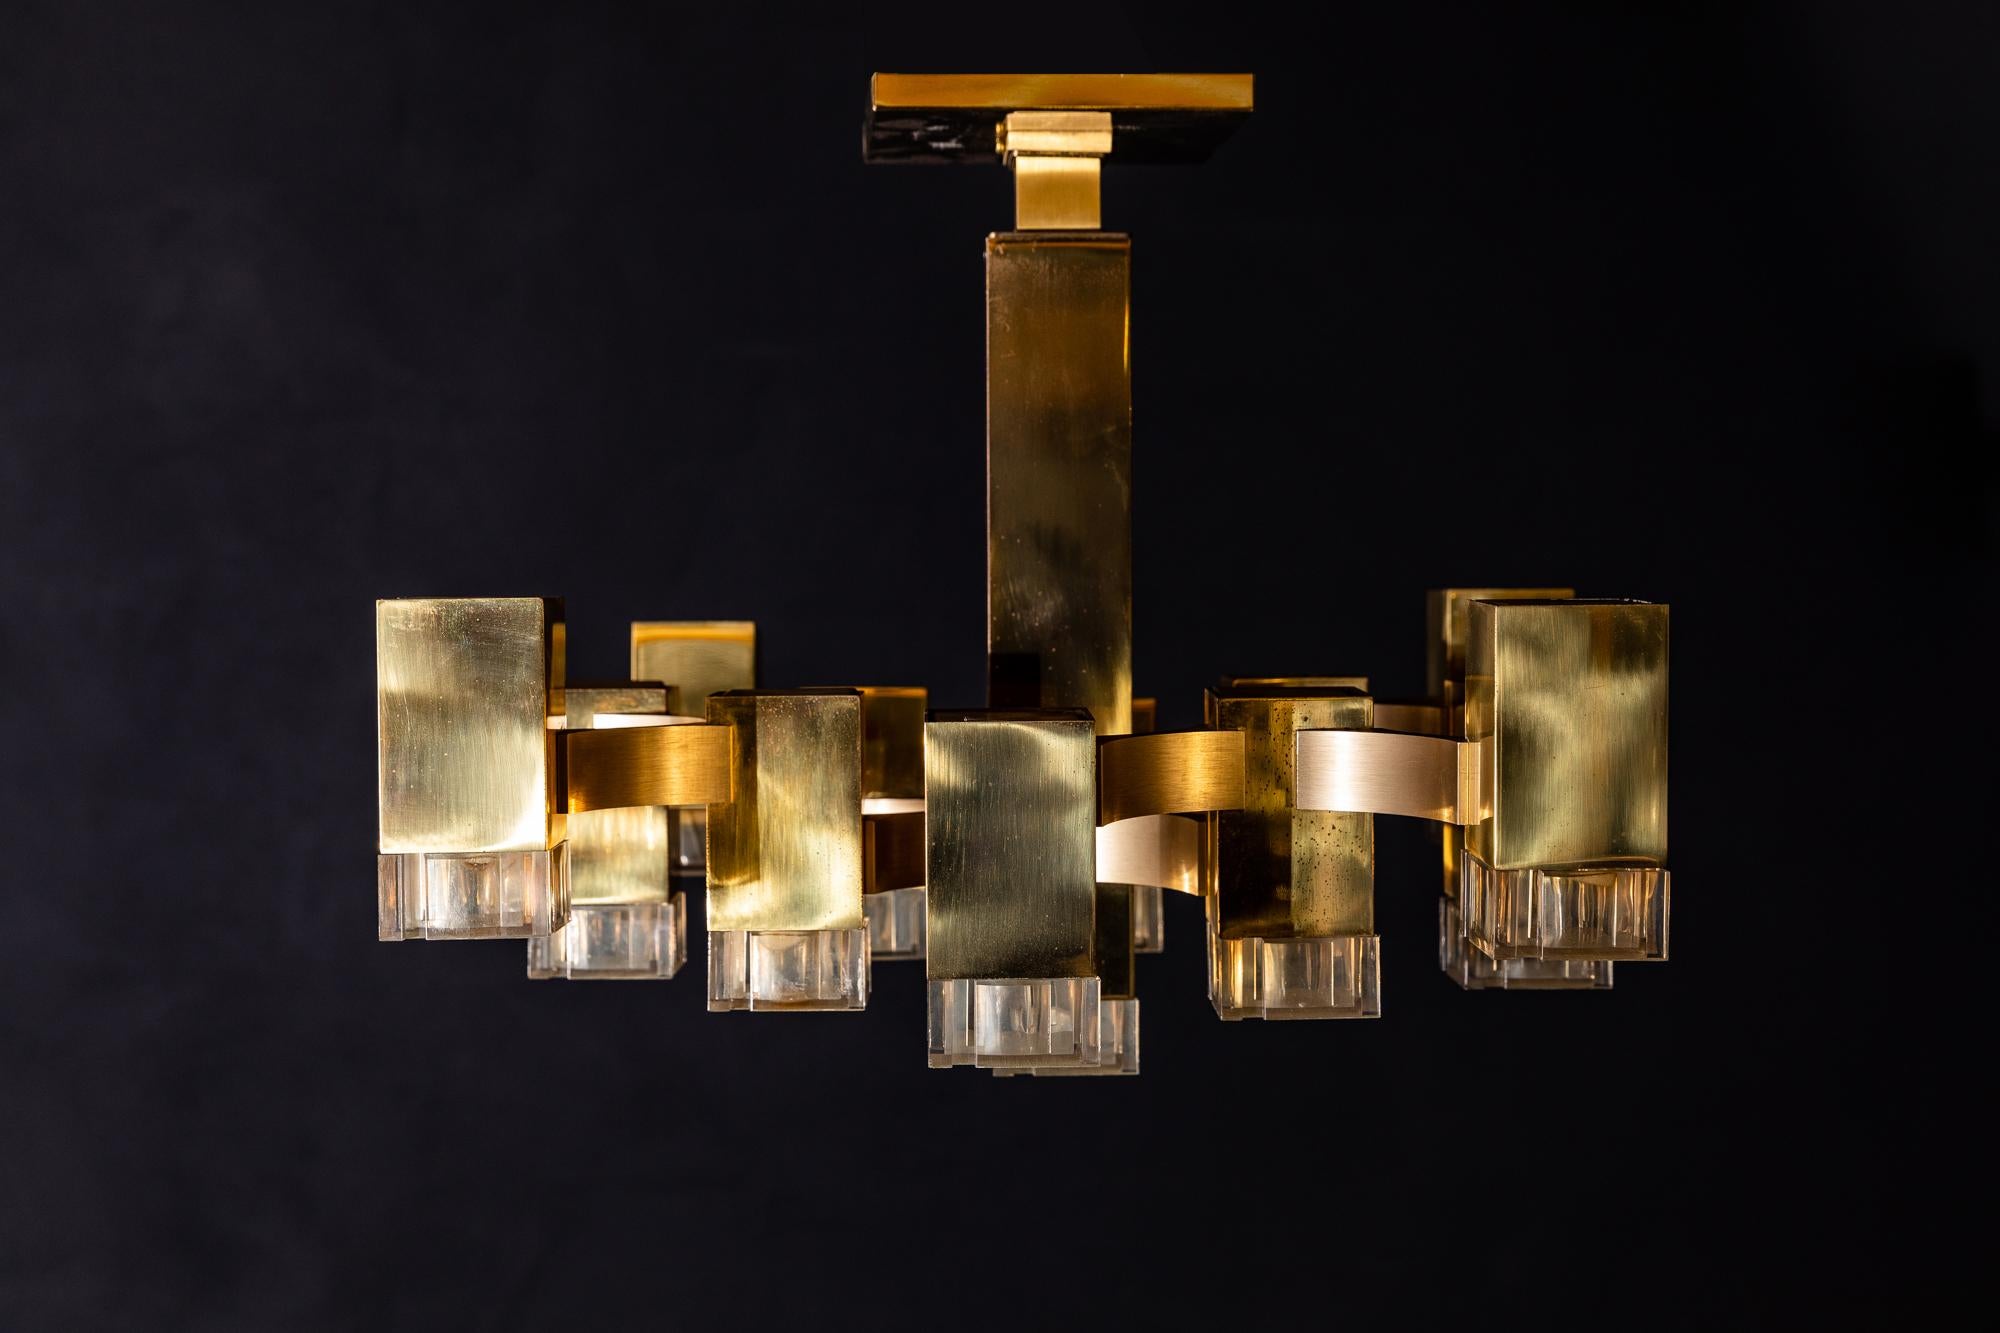 Mid-Century Modern cubic chandelier designed by Gaetano Sciolari. This chandelier consists of 13 rectangular polished brass cubes with Lucite shades. The hanging chain can be adjusted to suit, and the original ceiling cap is included. Labelled on